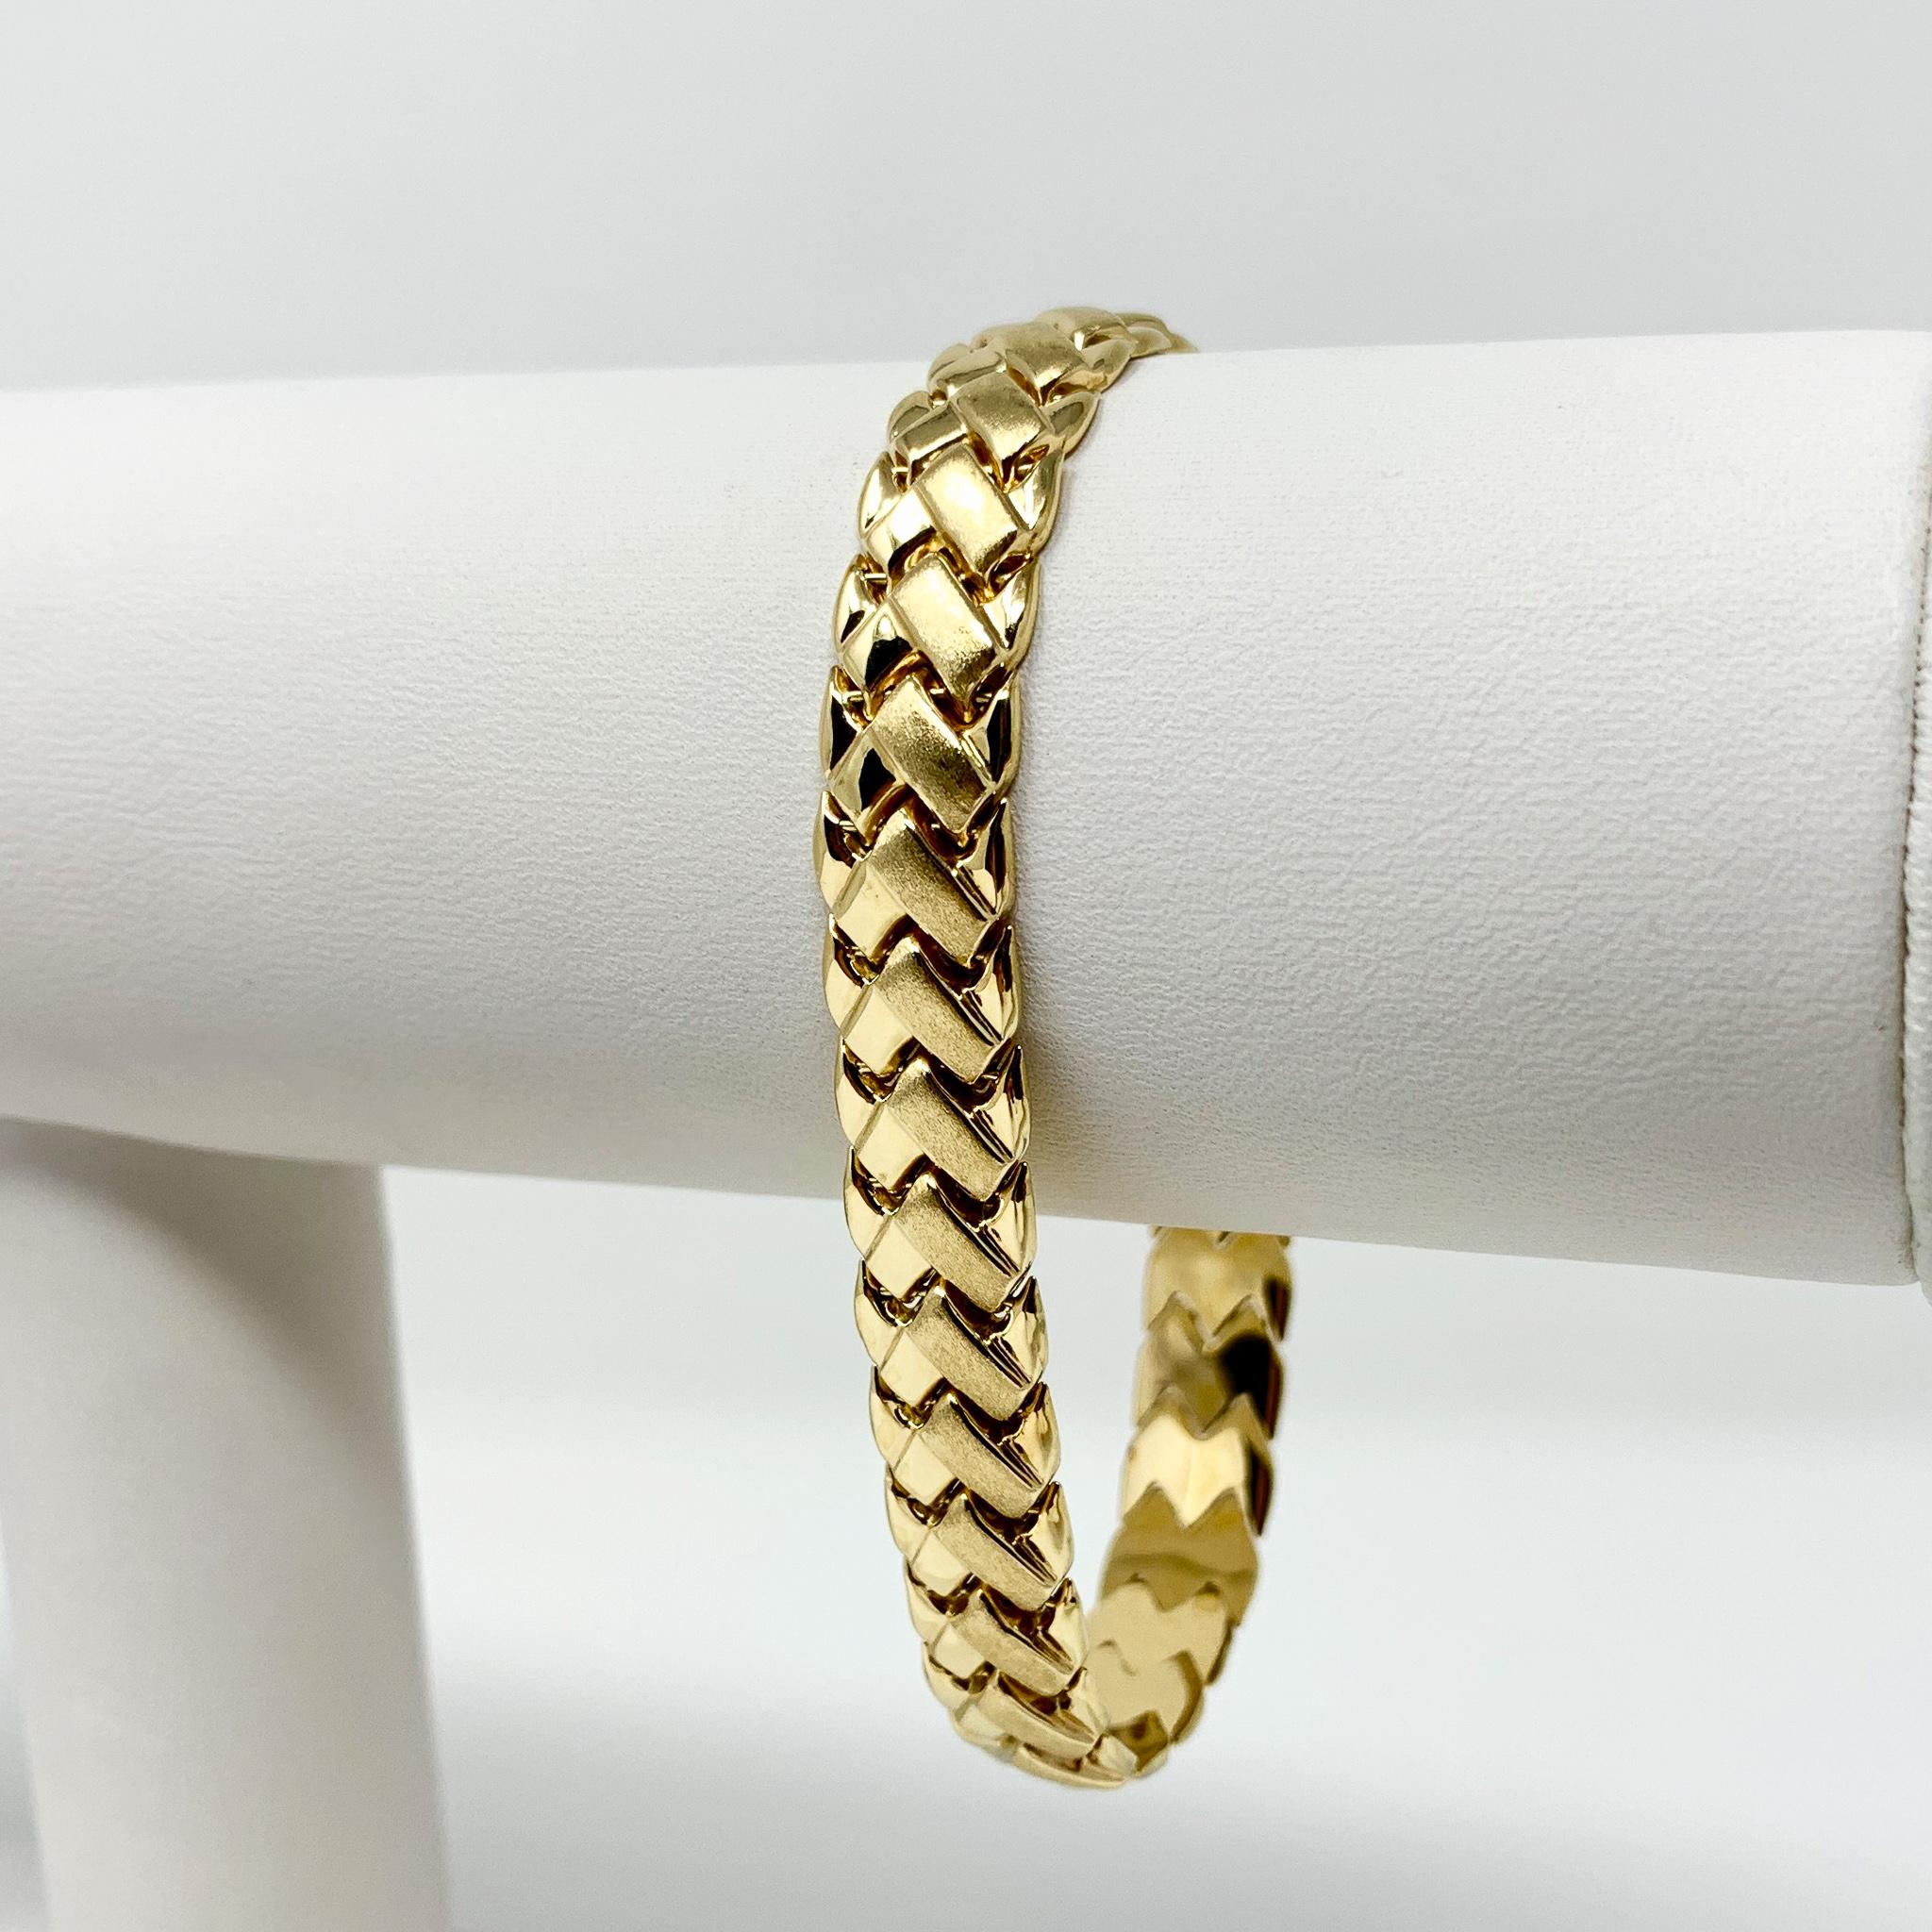 14k Fine Yellow Gold 10.2g Fancy Link 8.5mm Link Bracelet 7 Inches

Condition:  Excellent (Professionally Cleaned and Polished)
Metal:  14k Gold (Marked, and Professionally Tested)
Weight:  10.2g
Length:  7 Inches
Width:  8.5mm
Closure:  Box Tab